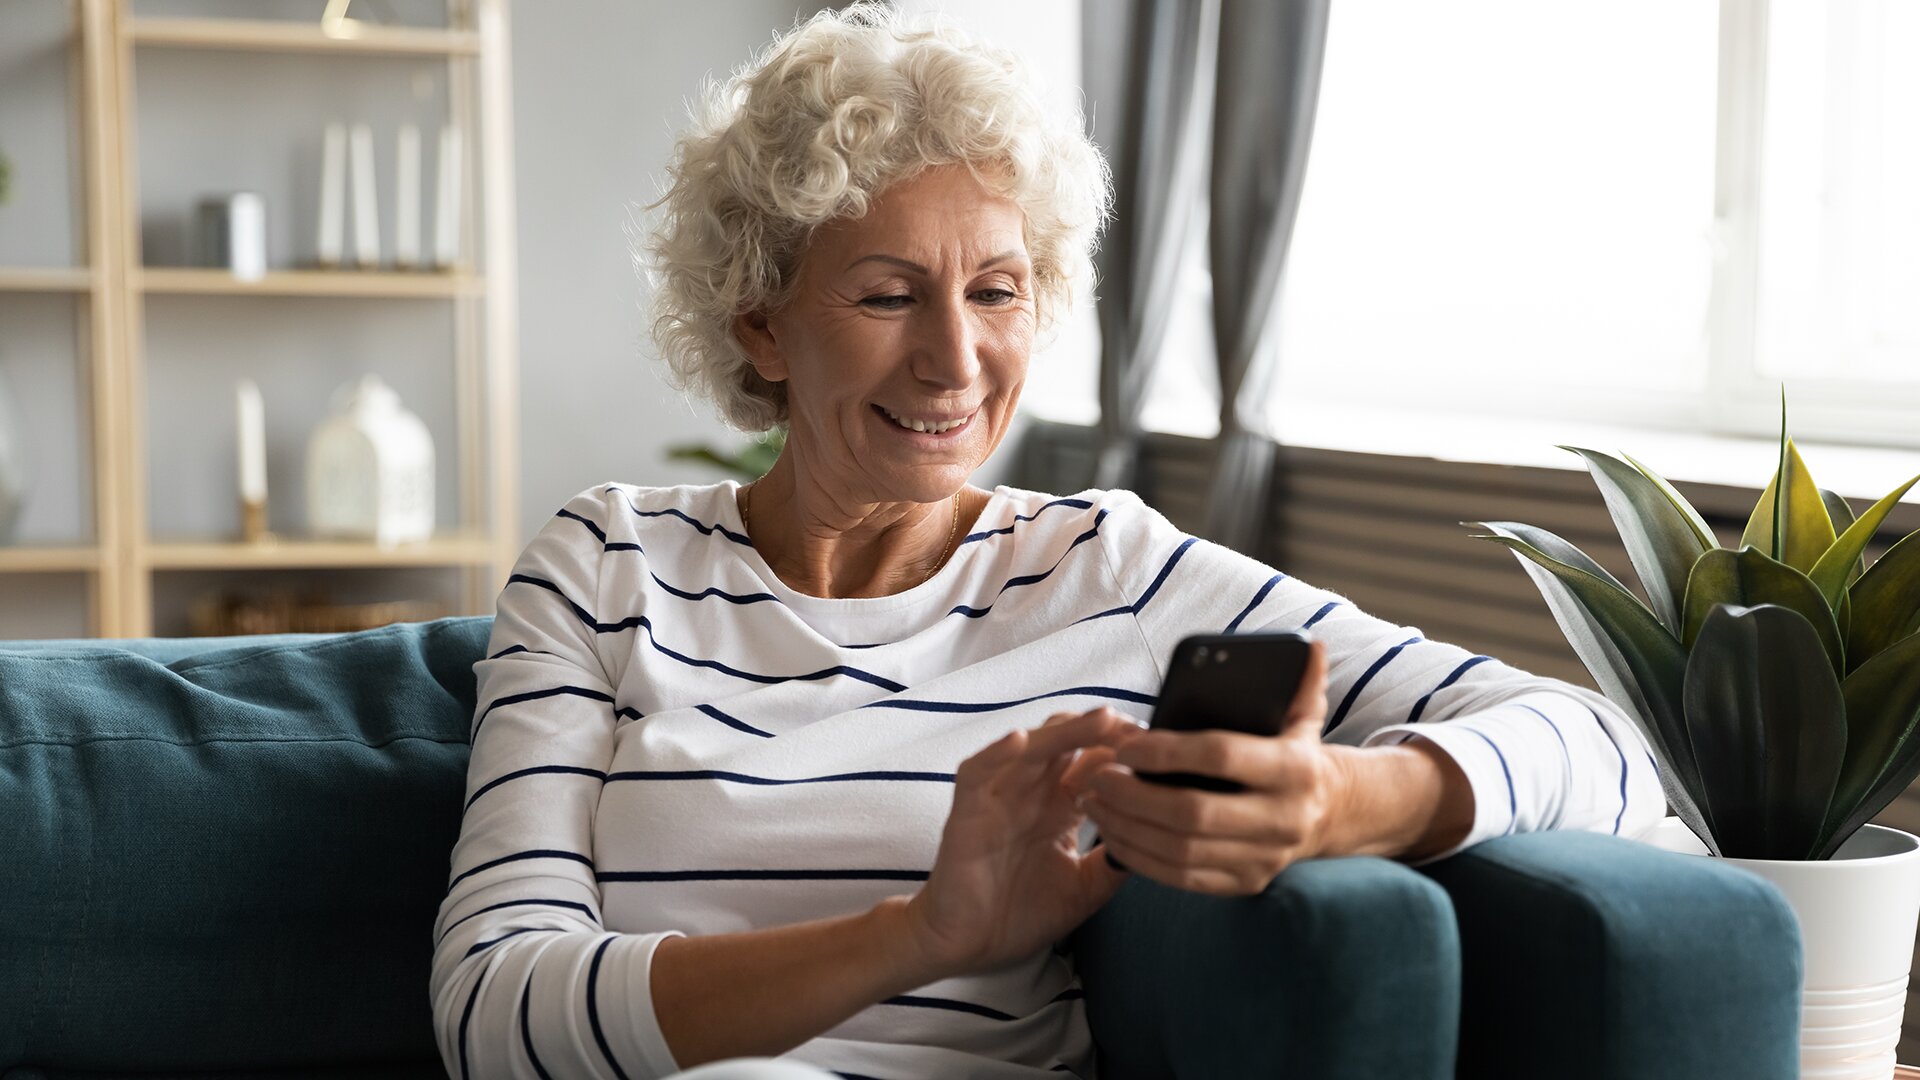 An elderly lady smiling while using mobile in independent living for seniors